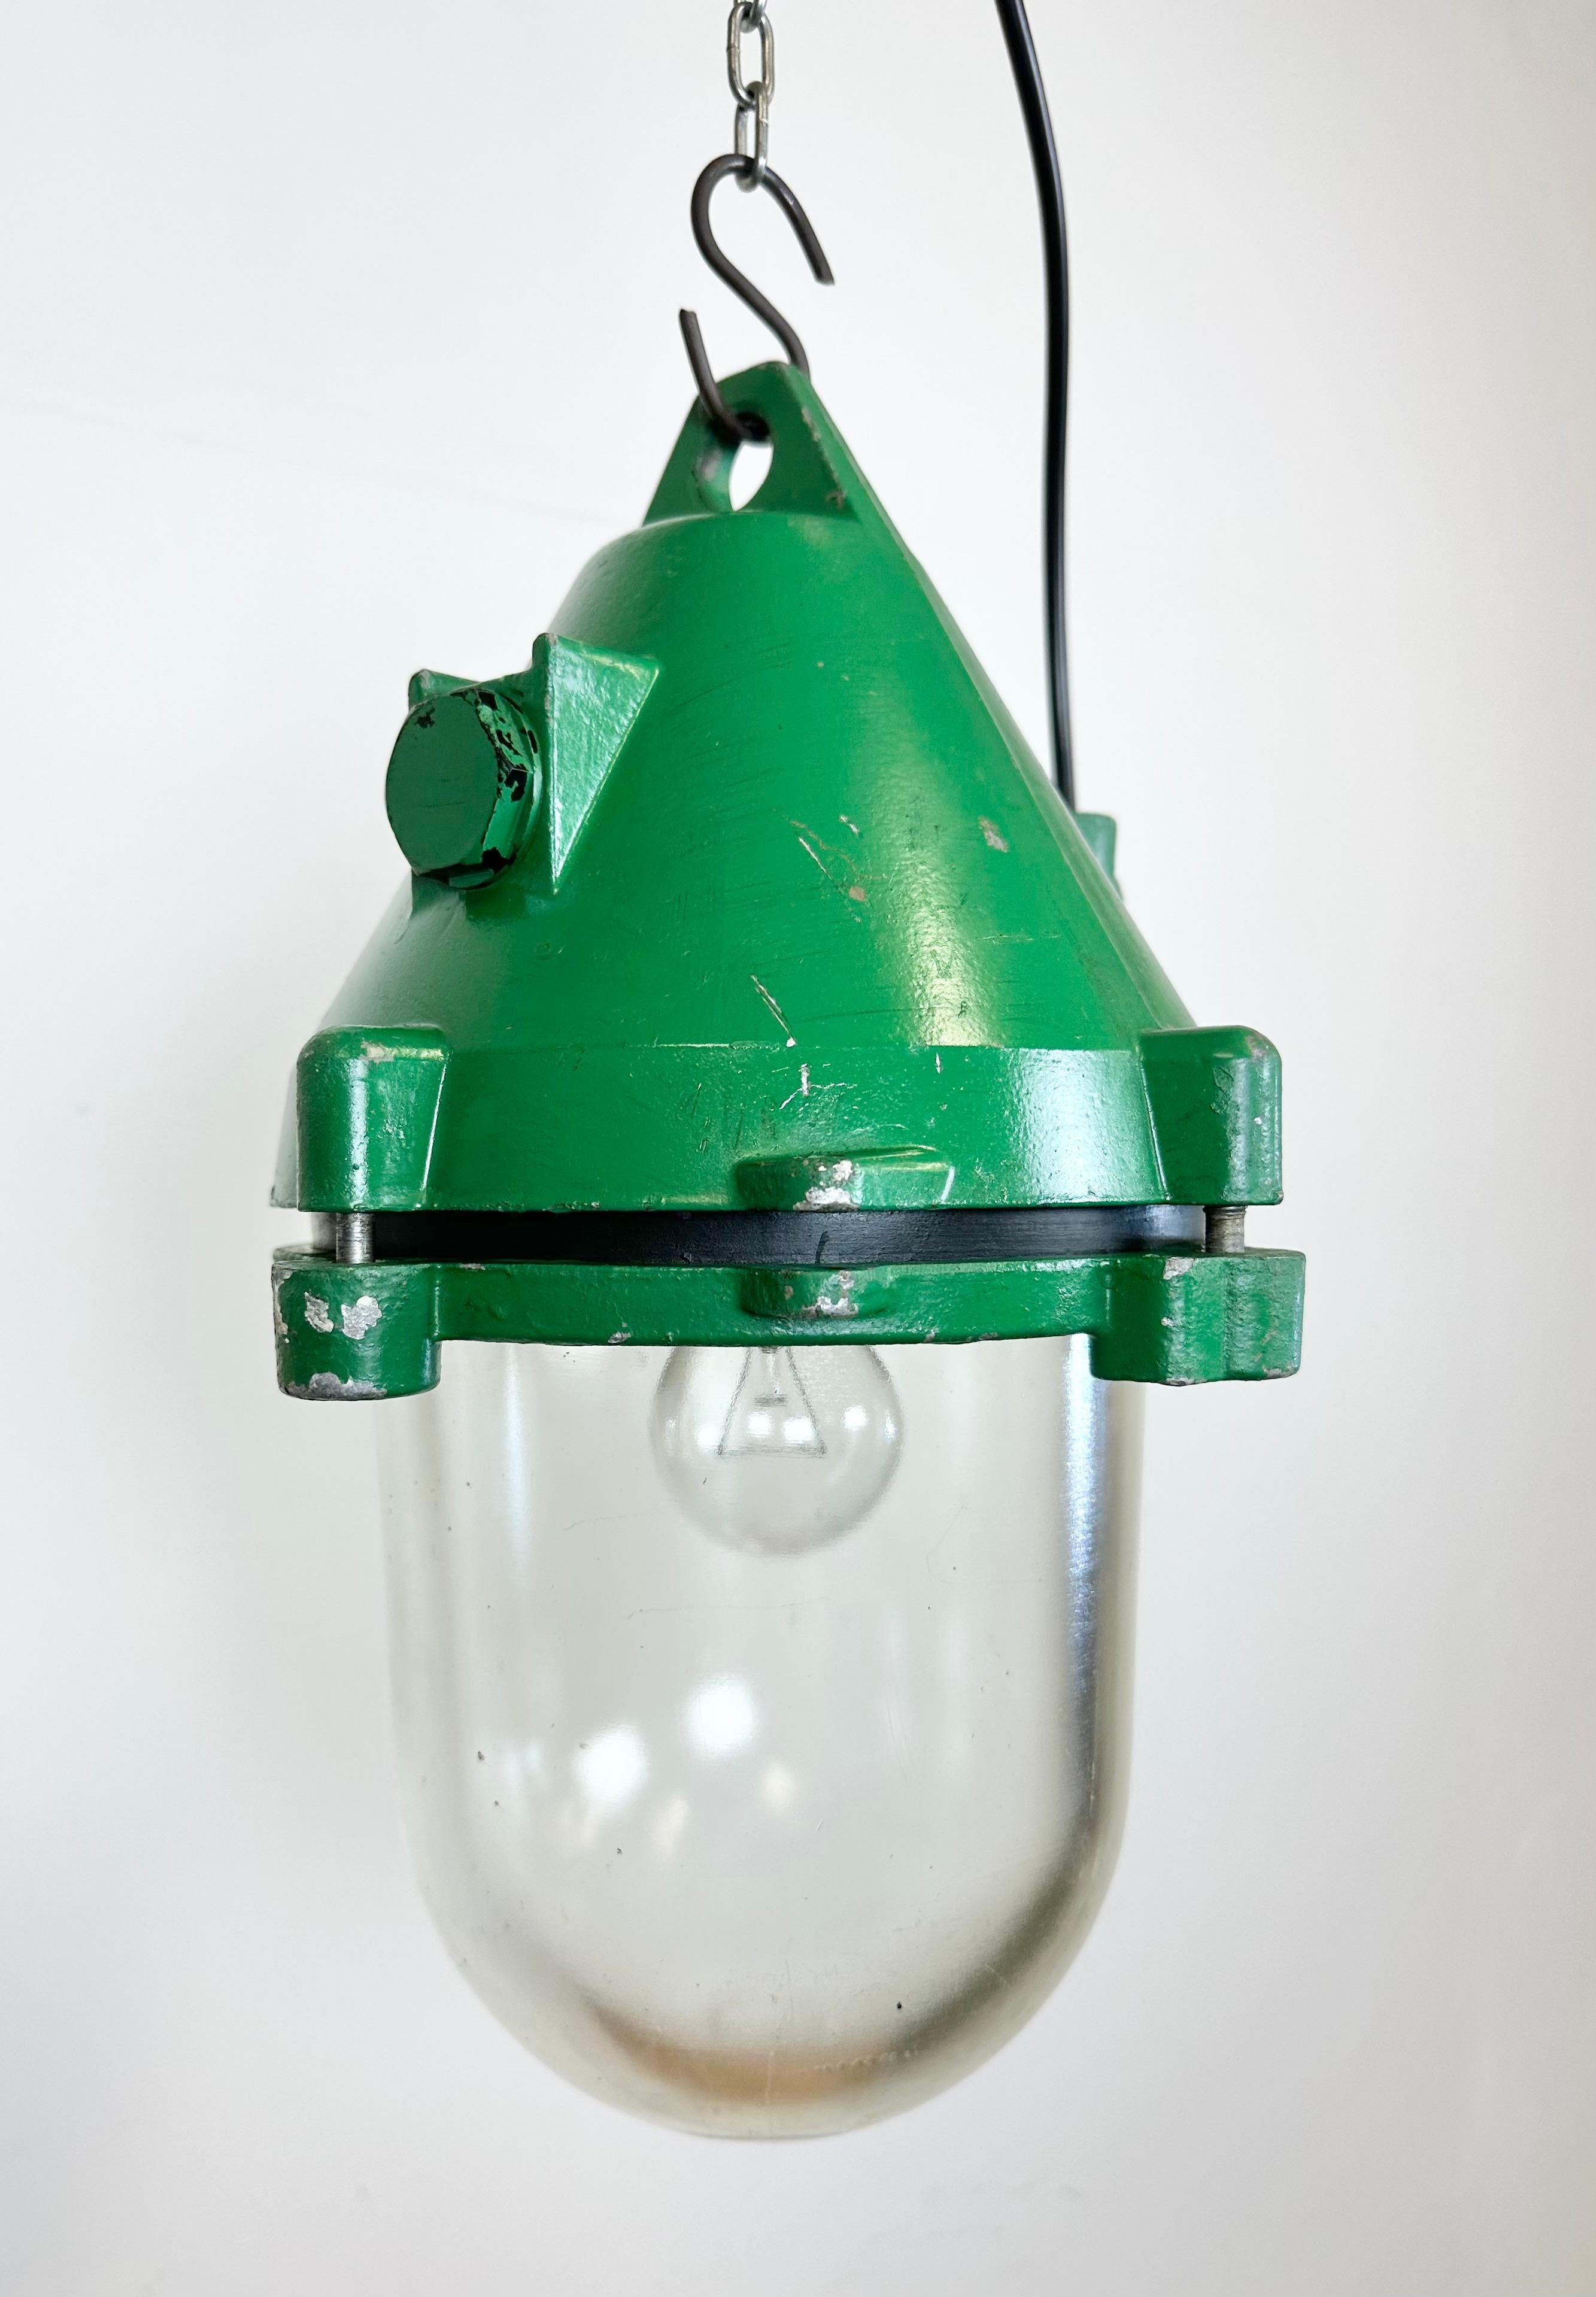 Green Industrial Cast Aluminium Explosion Proof Lamp, 1970s For Sale 1